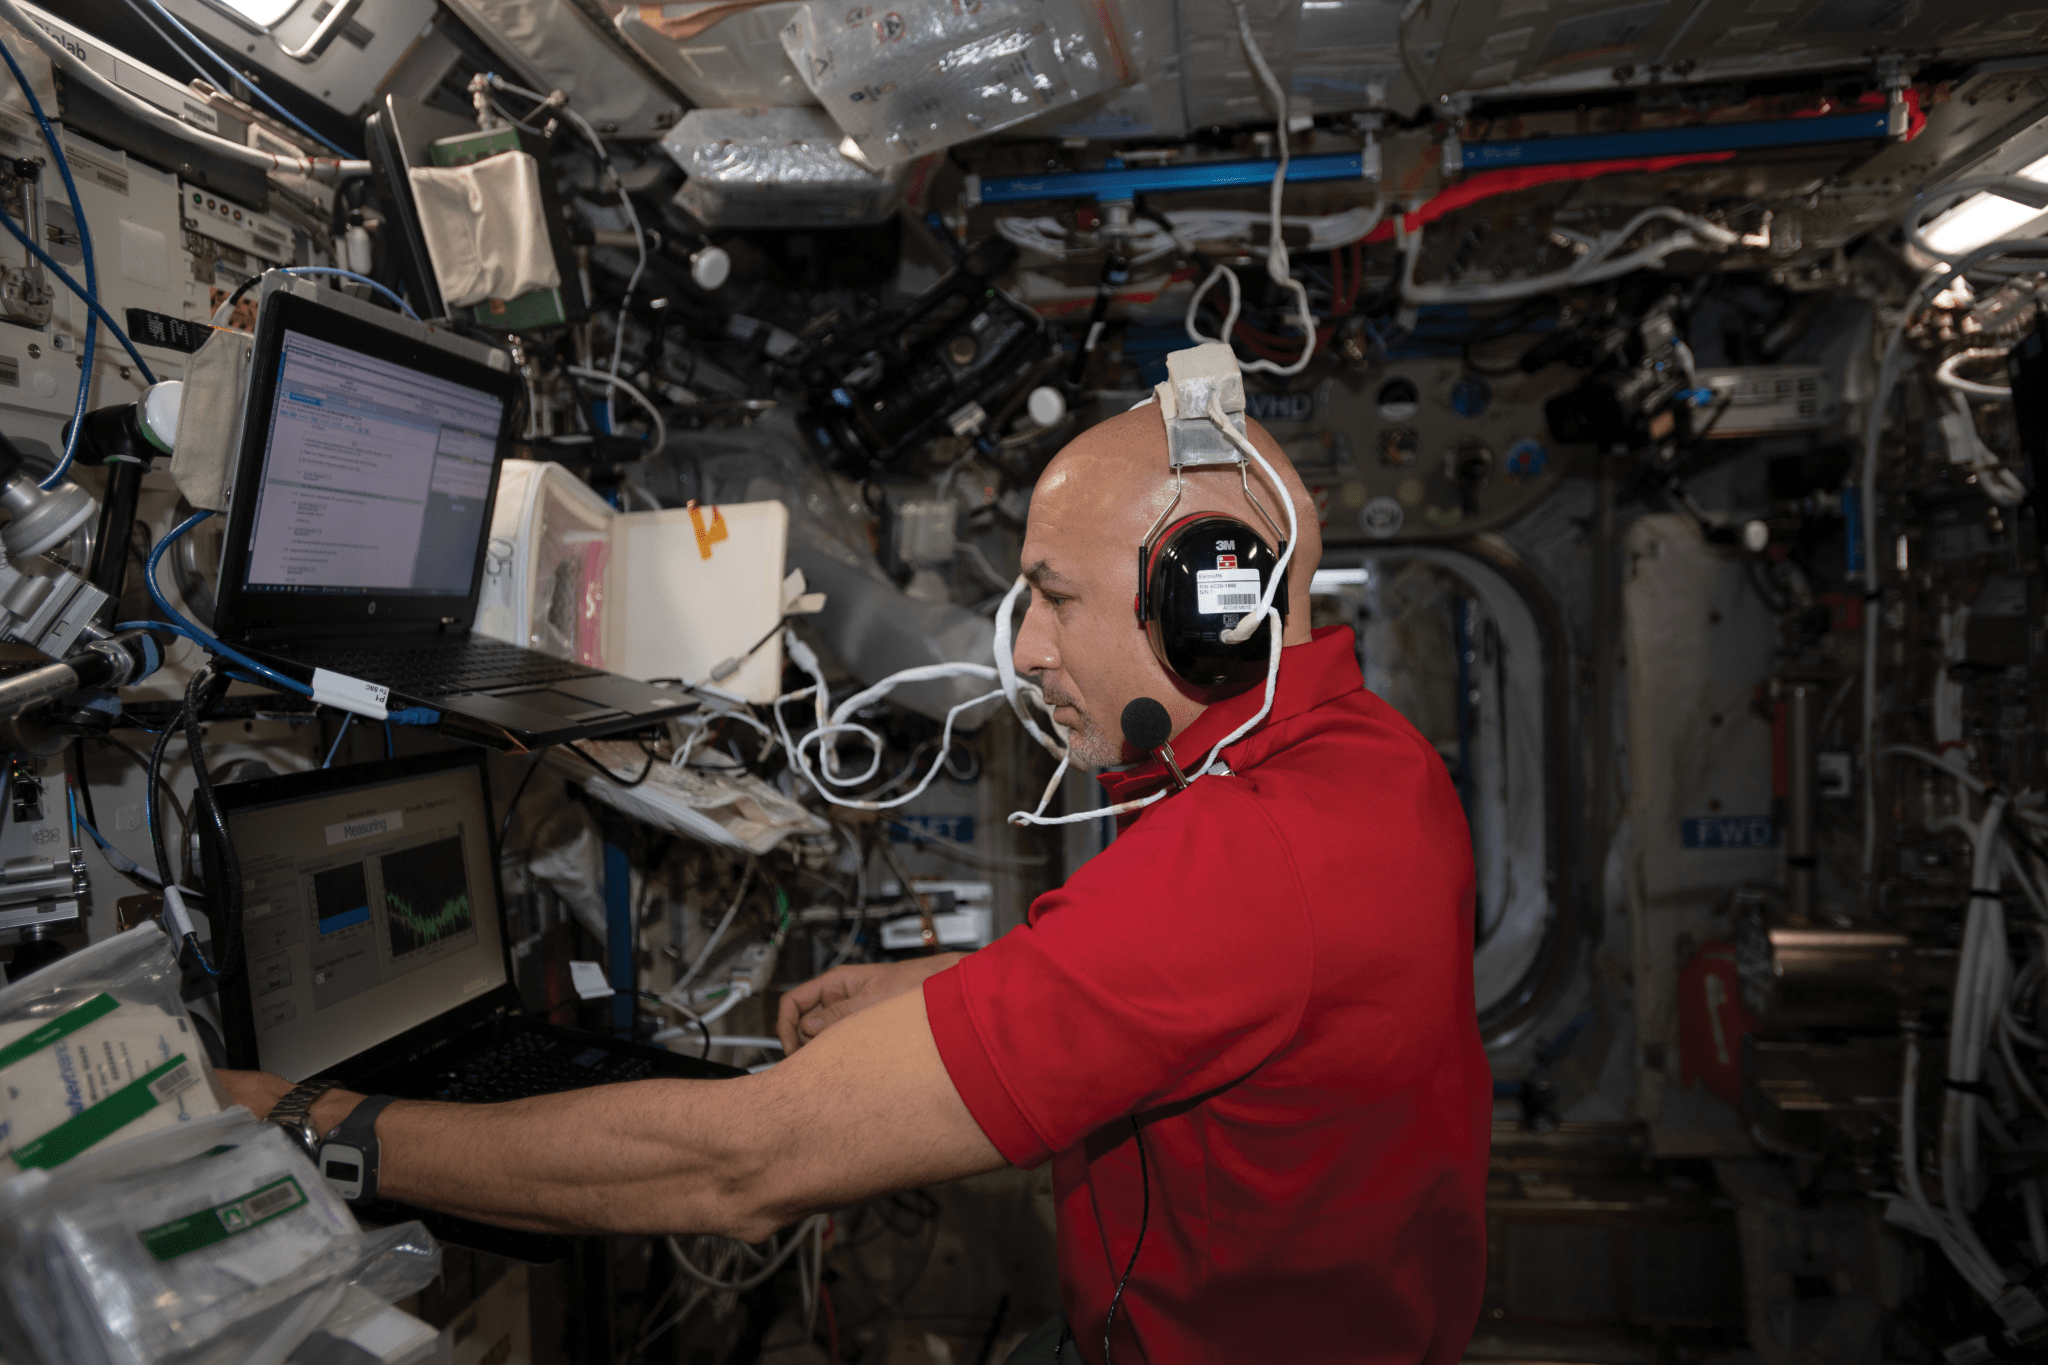 image of an astronaut conducting a hearing test